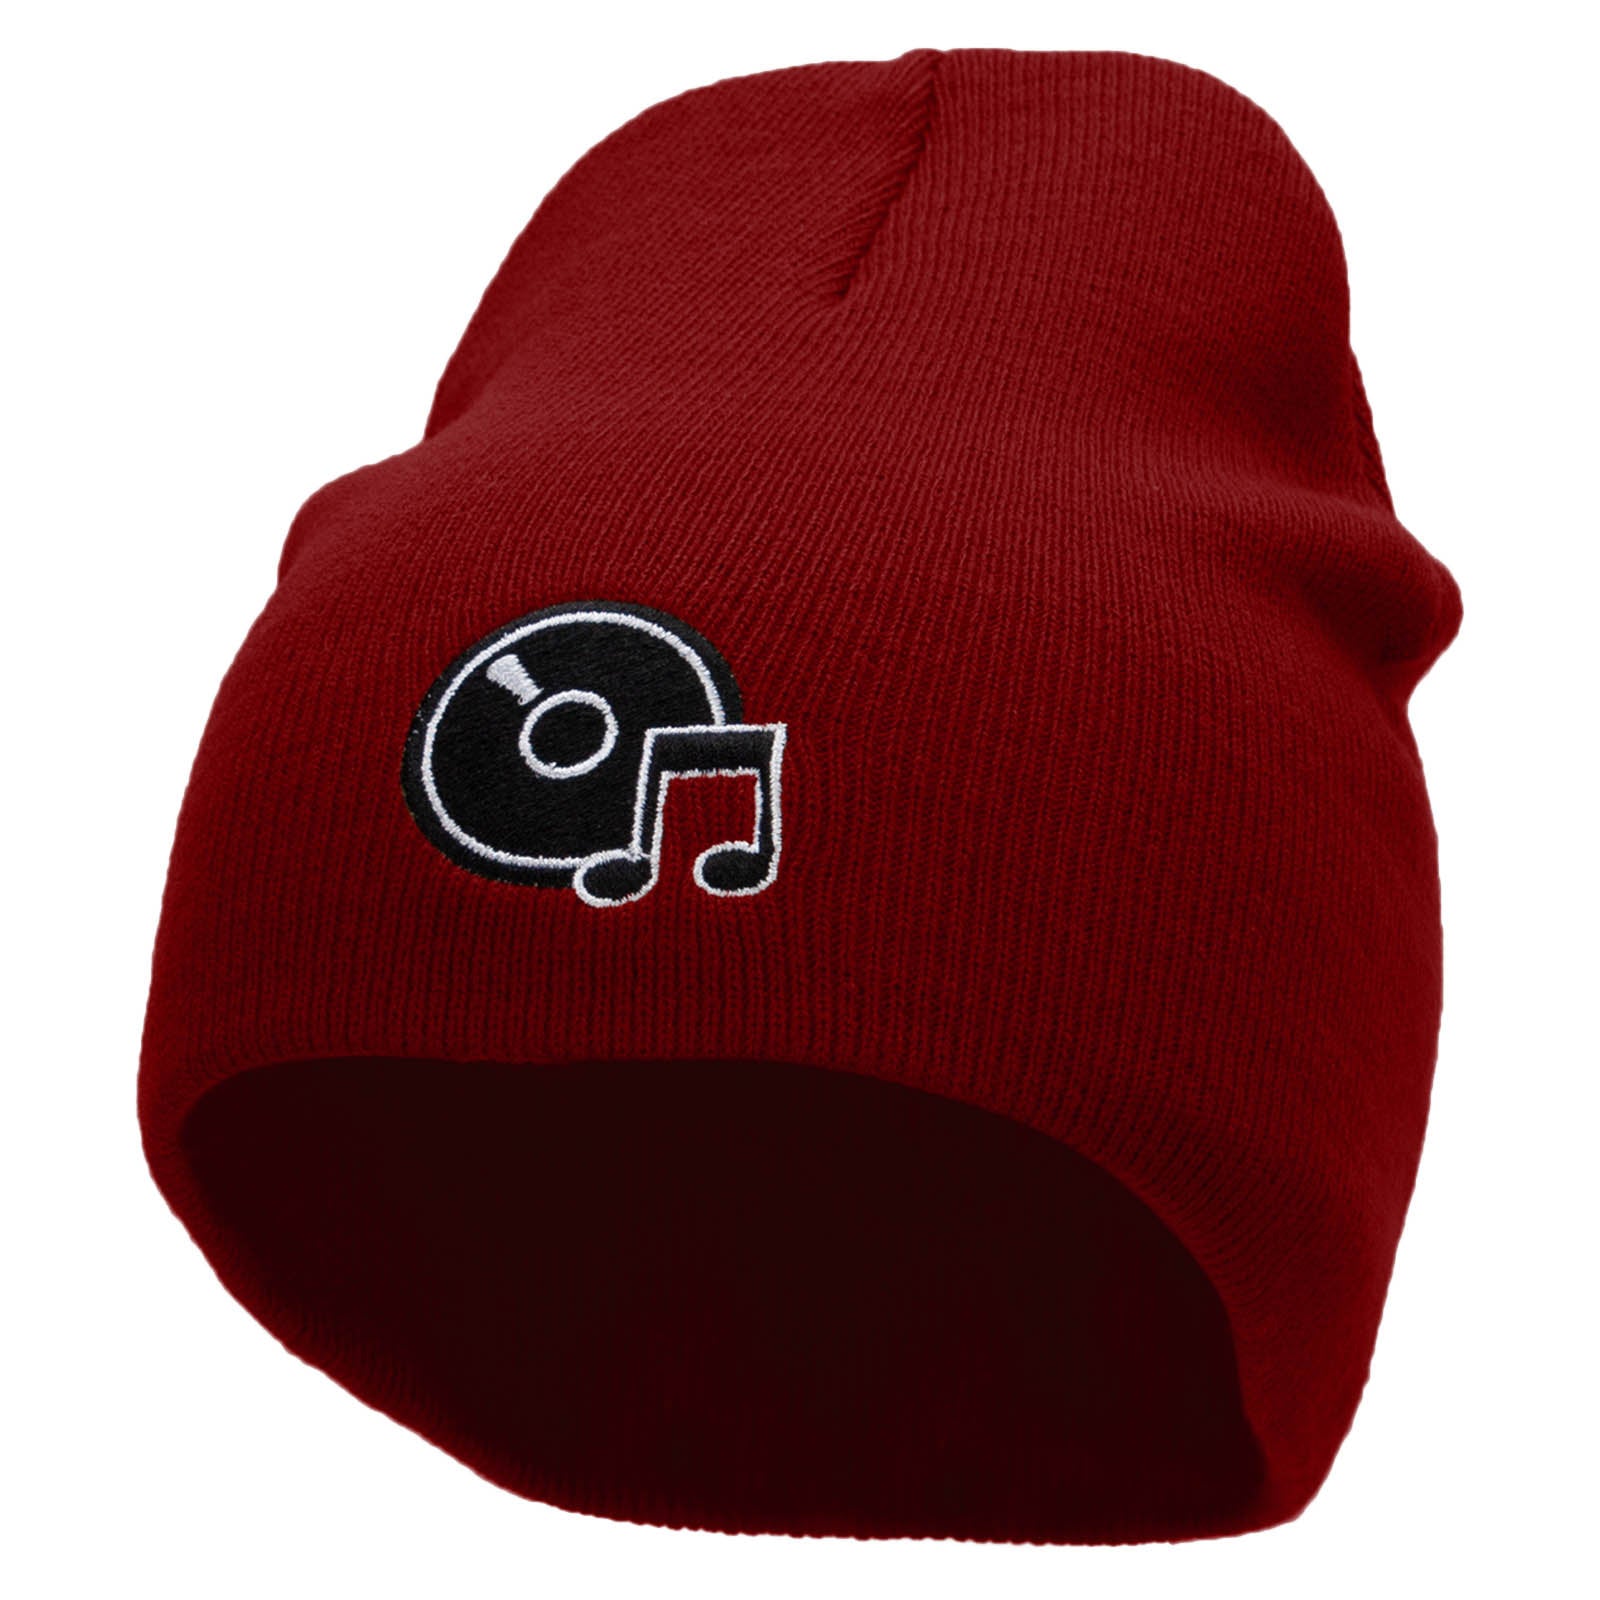 CD Icon Embroidered 8 inch Acrylic Short Blank Beanie - Red OSFM